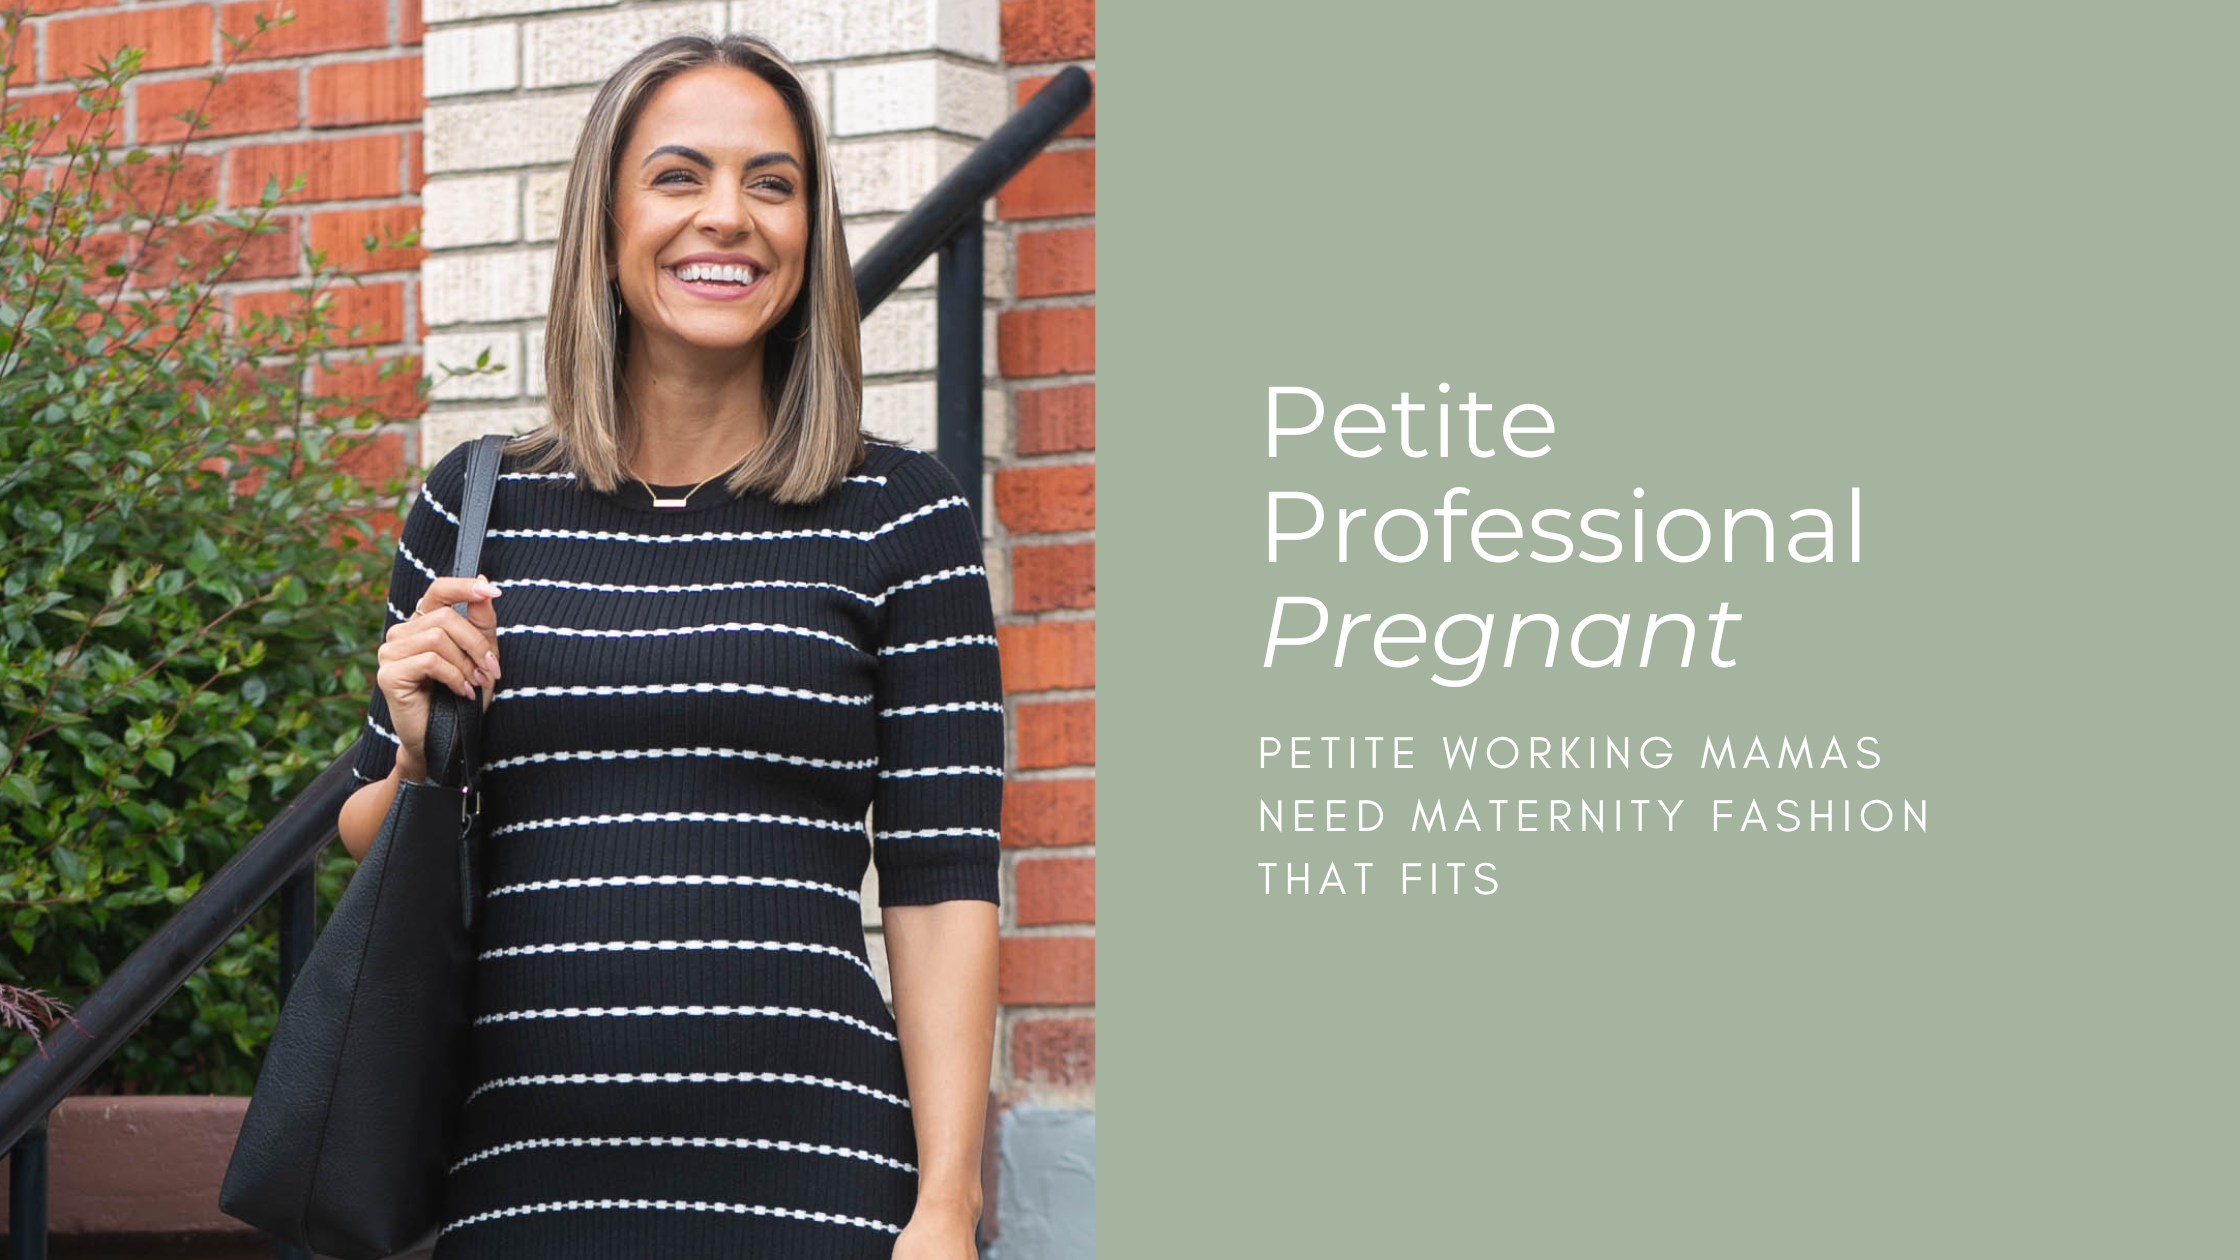 Postpartum Workwear: What to Wear to the Office After Maternity Leave